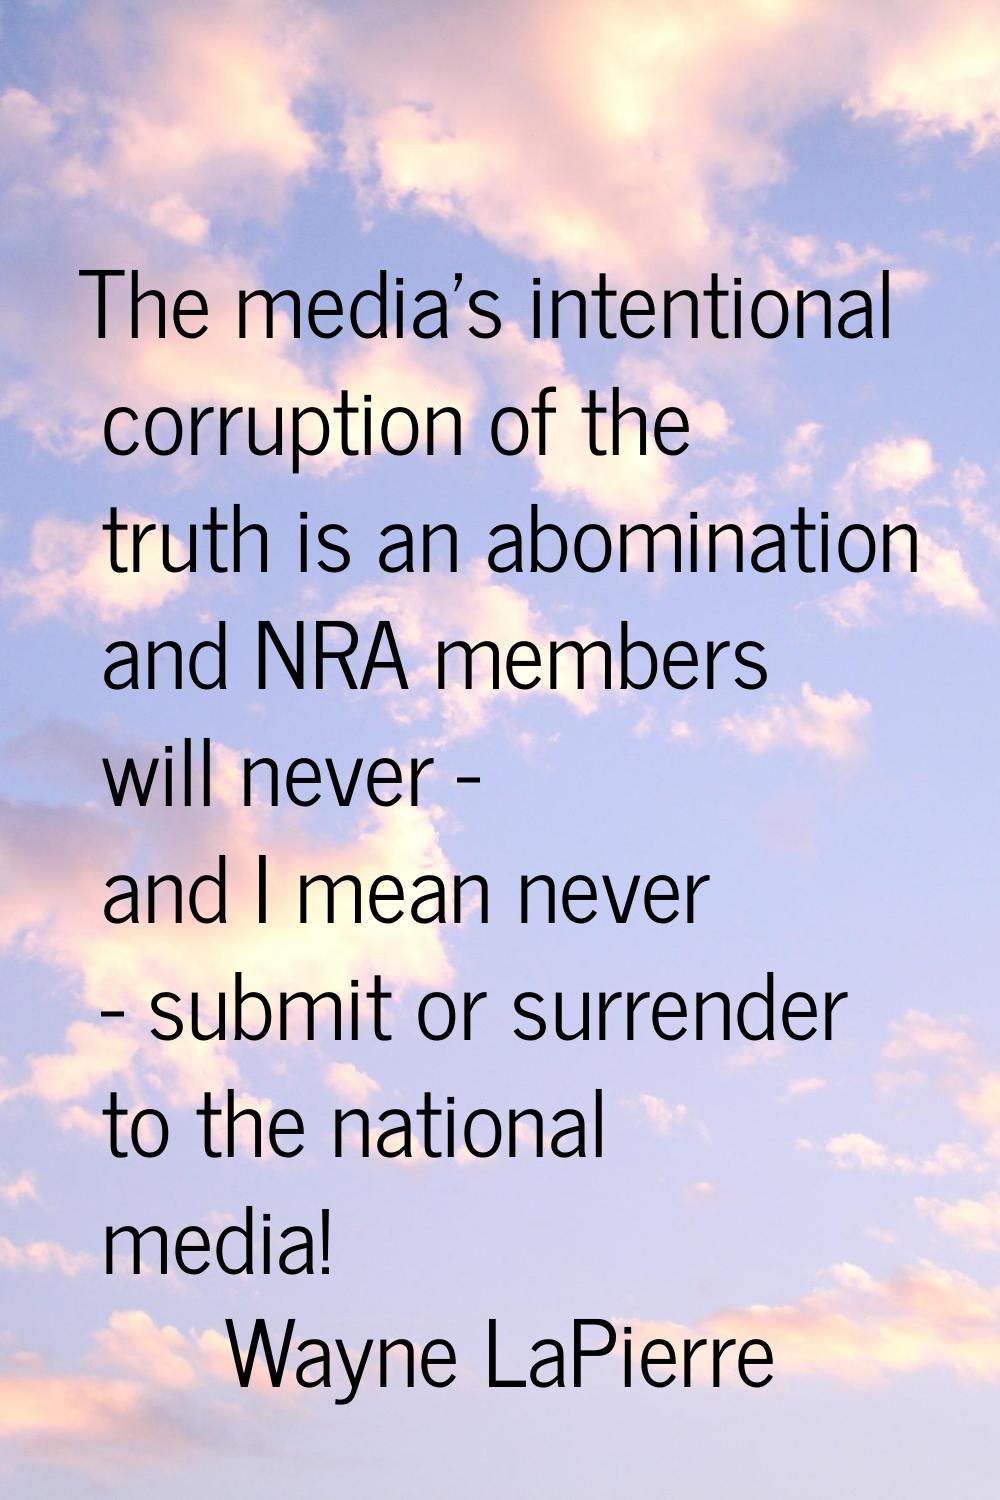 The media's intentional corruption of the truth is an abomination and NRA members will never - and 